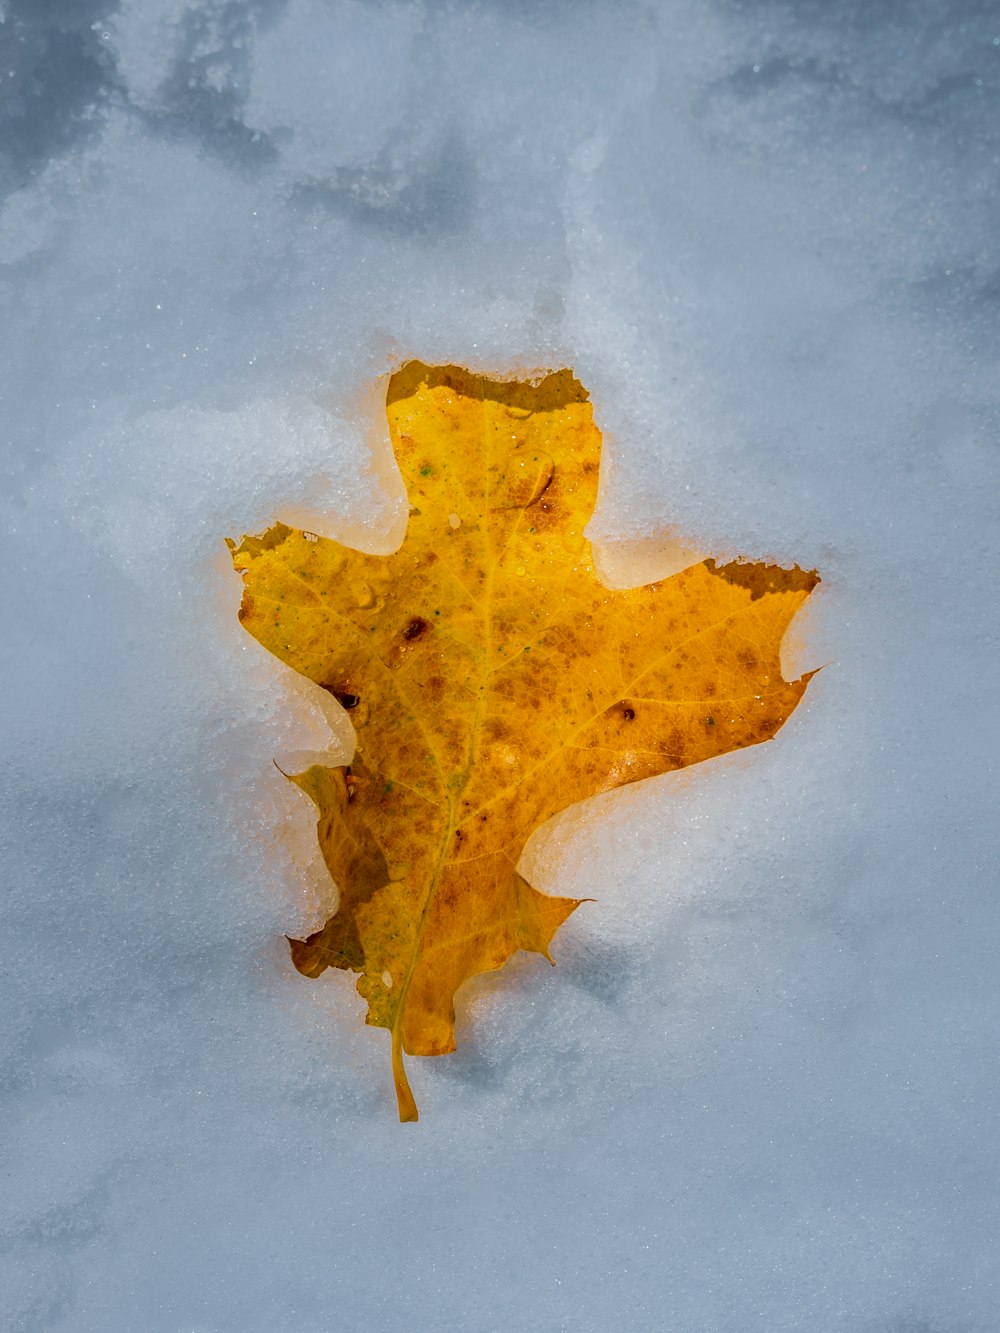 a yellow leaf laying in the snow